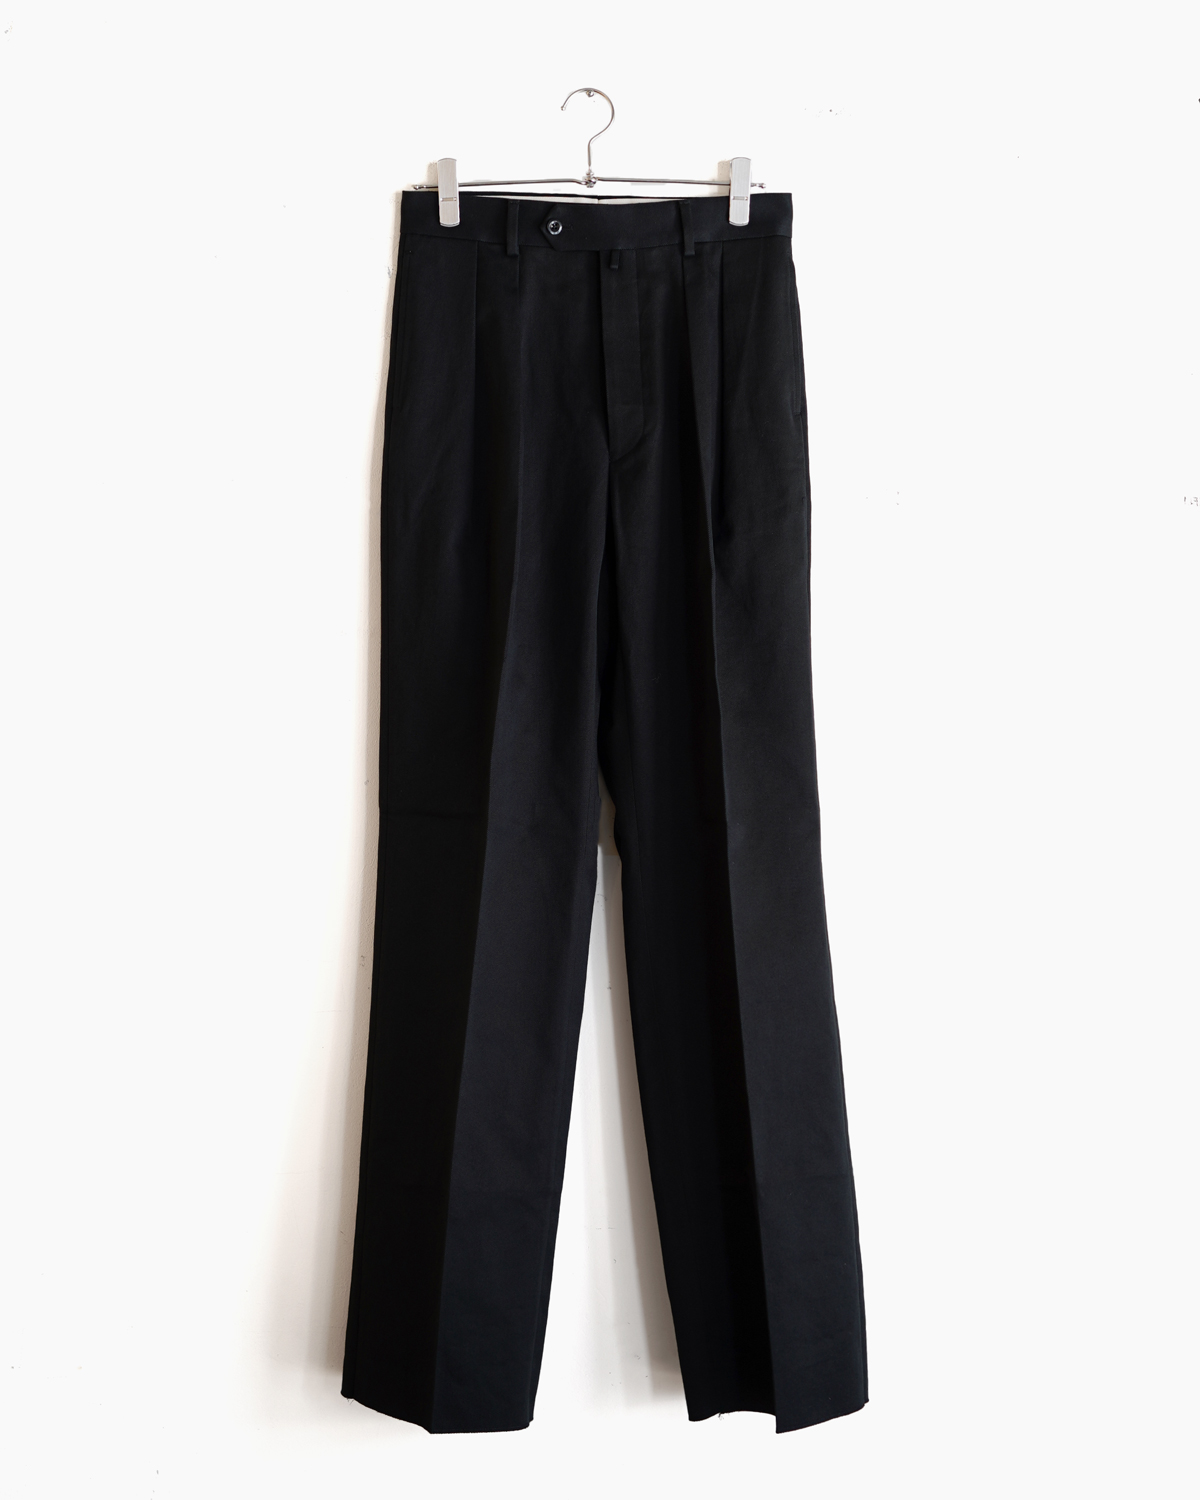 SUSTAINABLE DRILL TWILL COTTON｜WIDE TYPE Ⅰ - Black｜NEAT